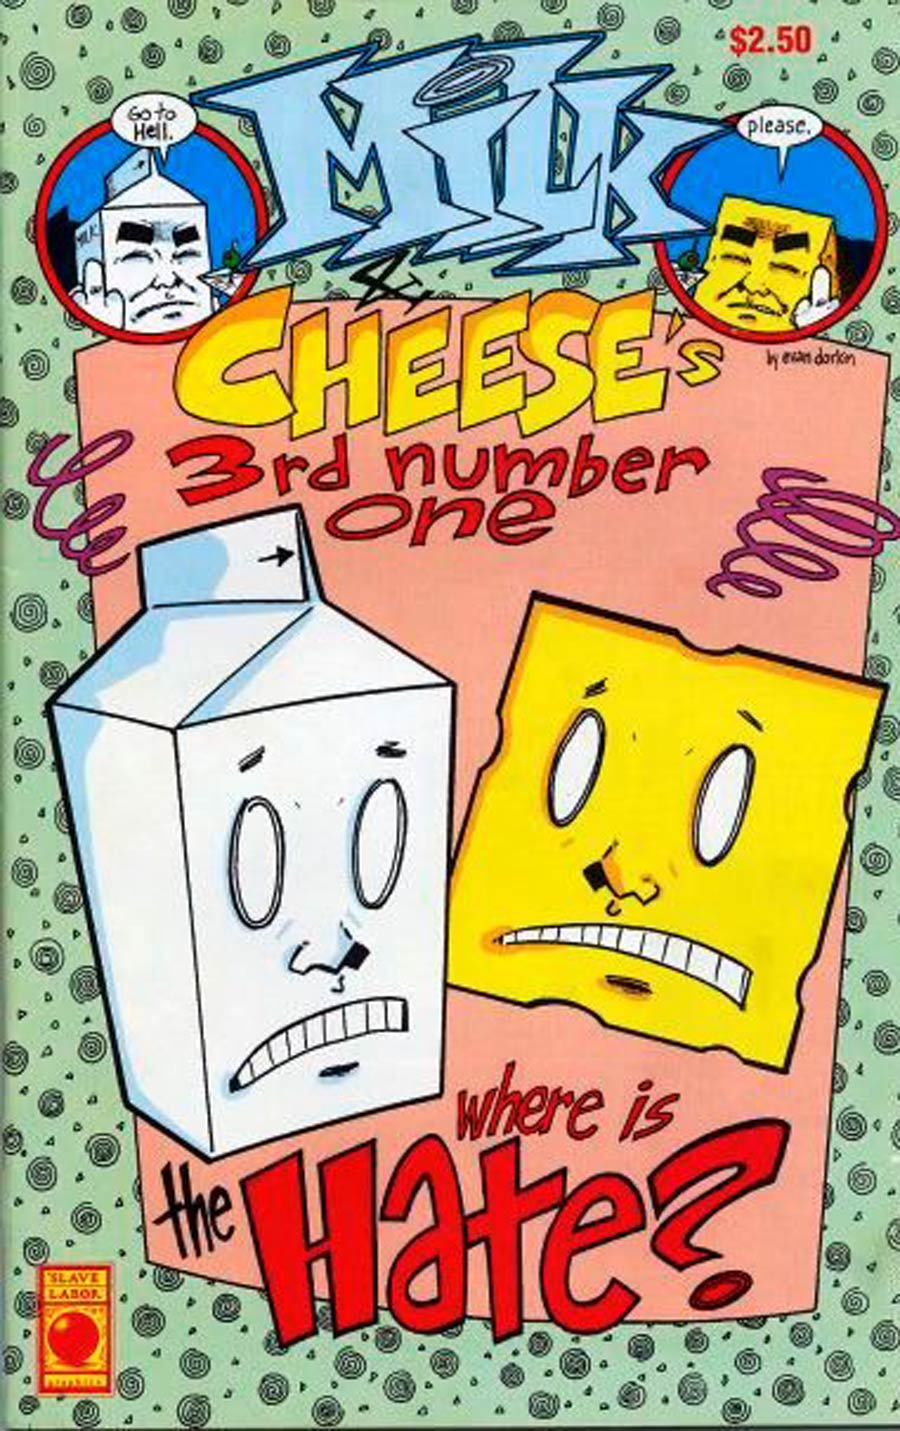 Milk And Cheese #3 (3rd Number One) Cover C 3rd Ptg